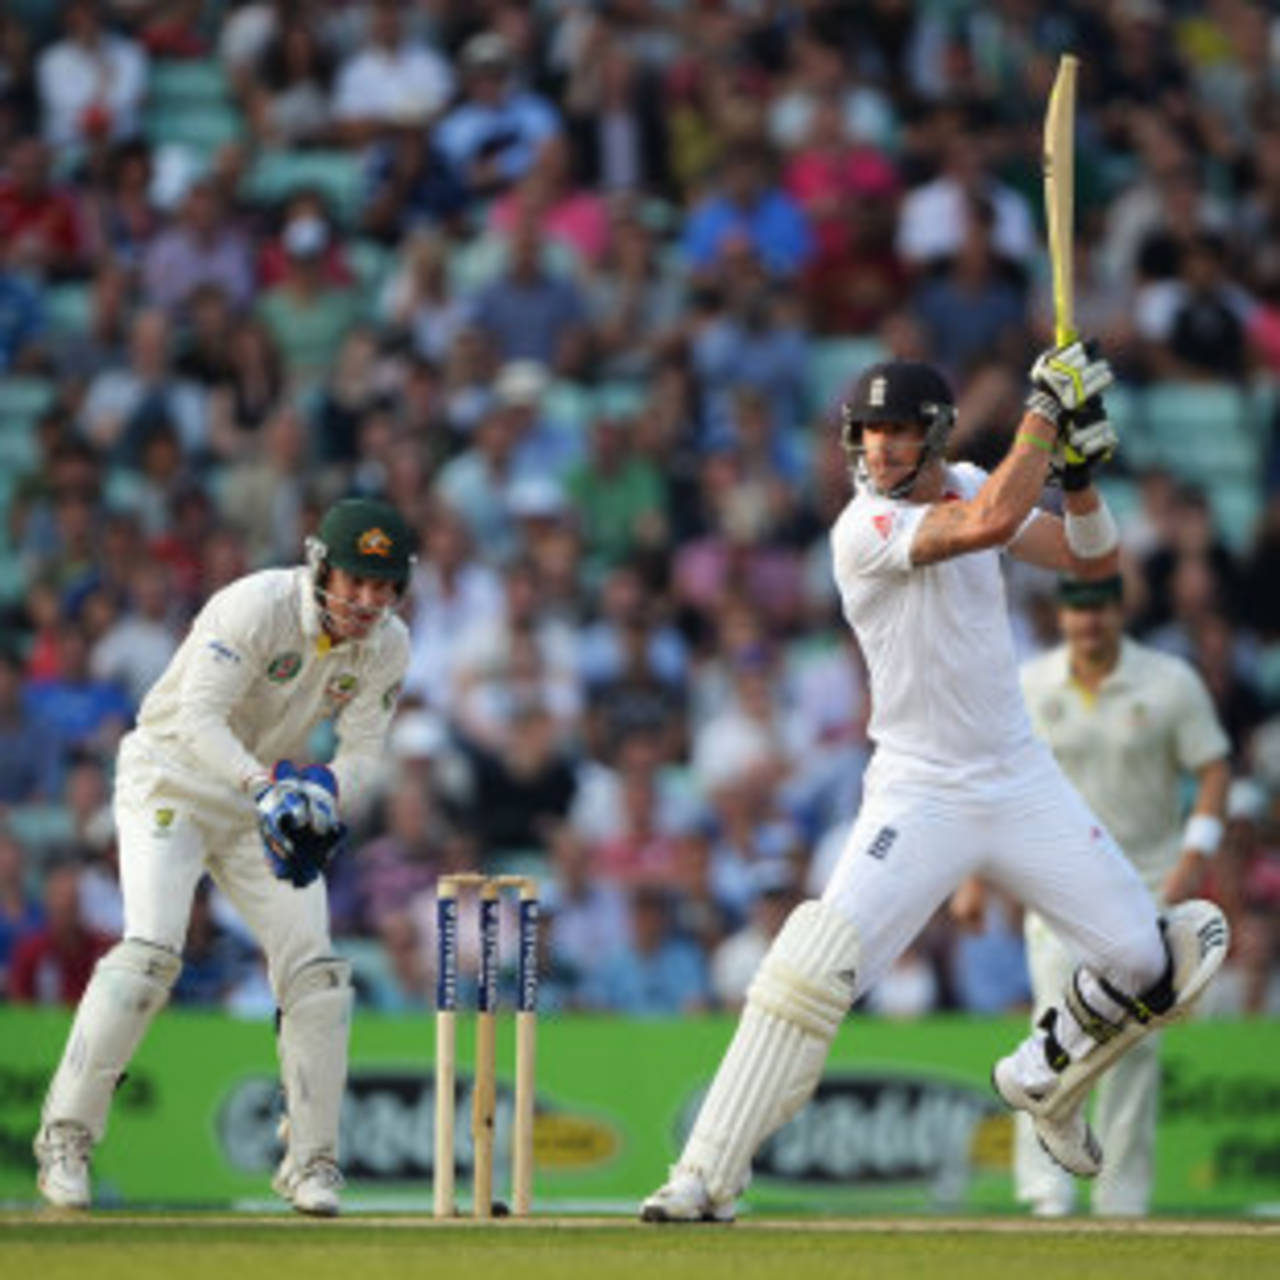 Kevin Pietersen raced to fifty from just 36 balls, England v Australia, 5th Investec Test, The Oval, 5th day, August 25, 2013